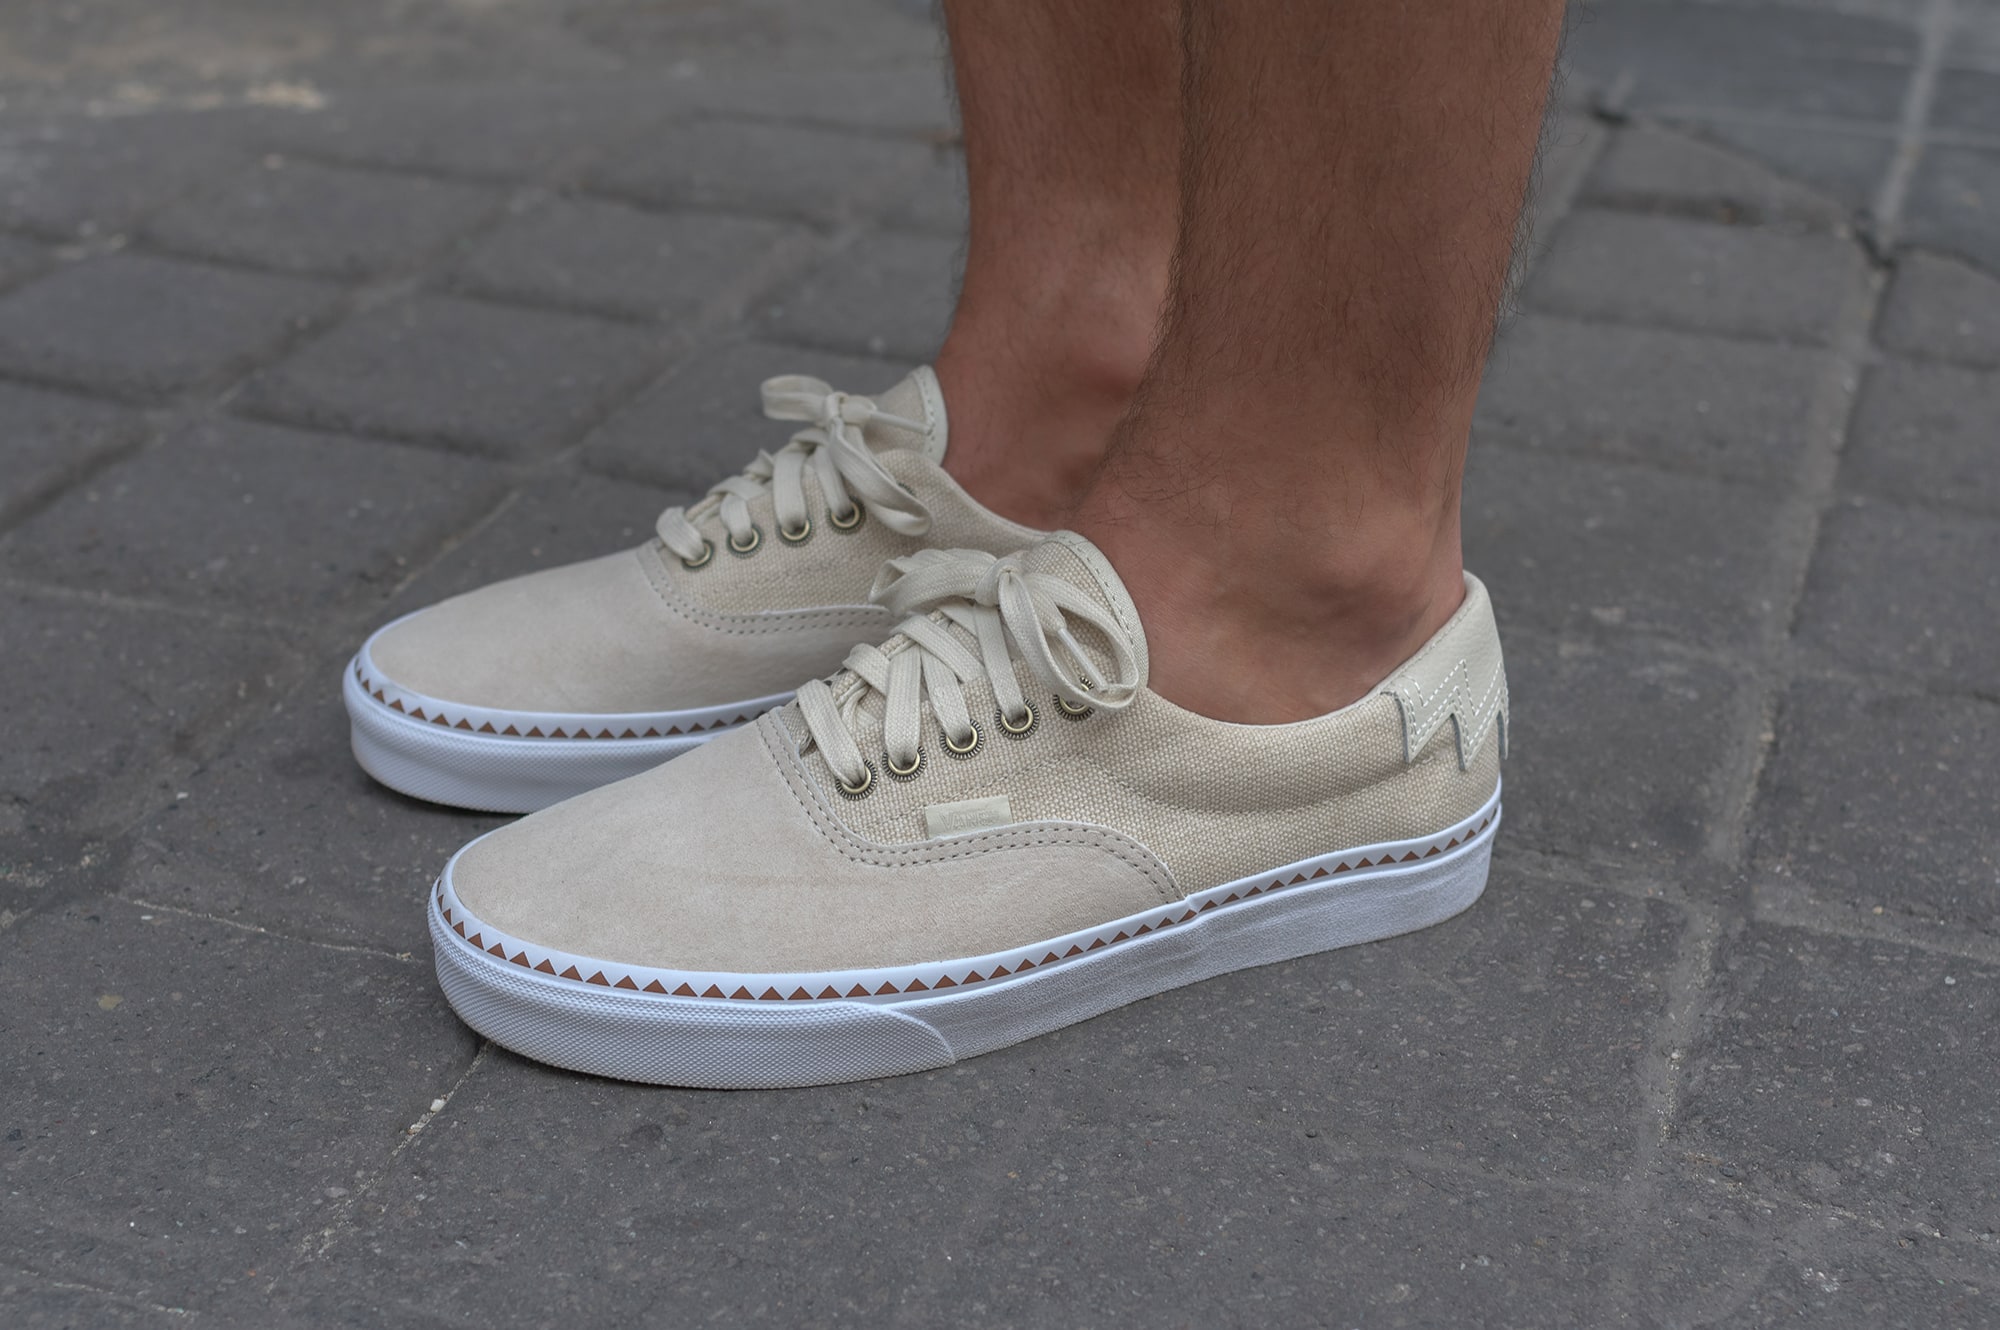 Noragi shuren projects in street heritage style with vans era native. sneakers and denim destroyed shorts